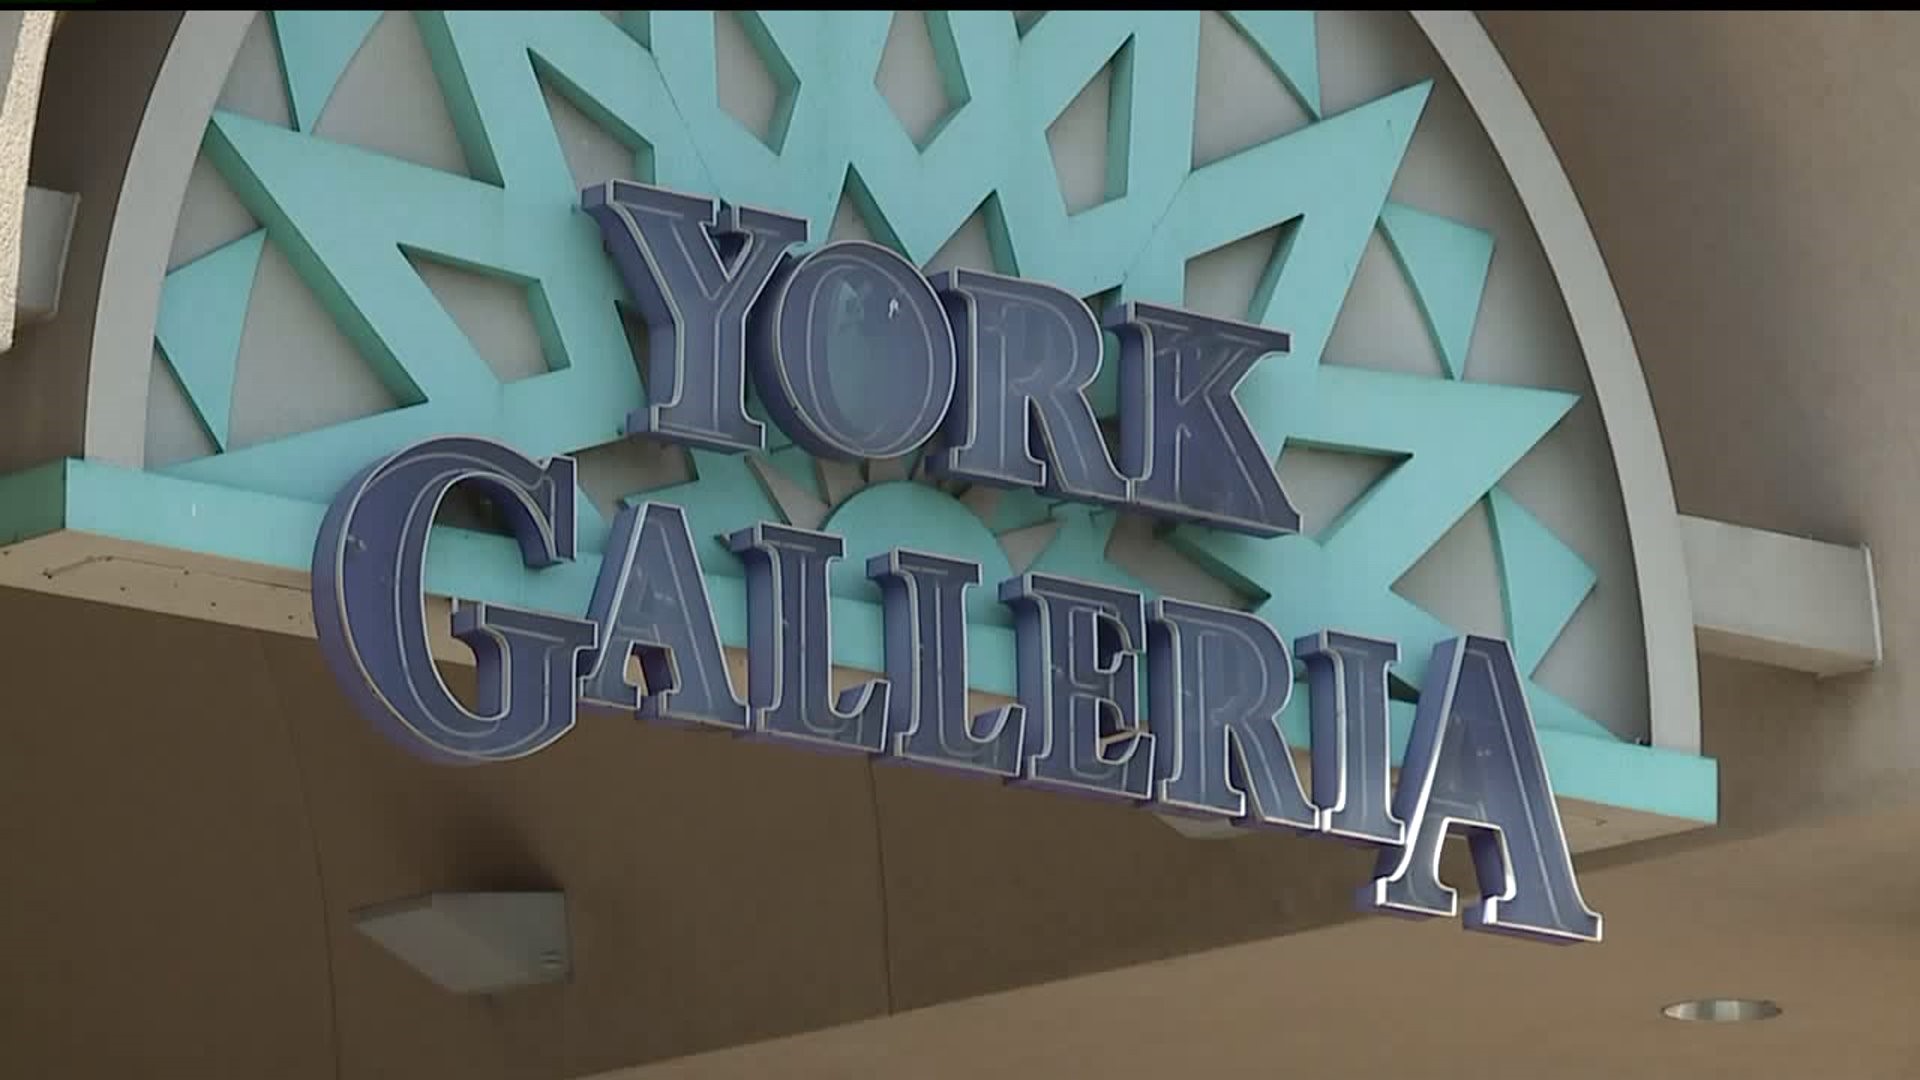 Store closures open new opportunities for York Galleria